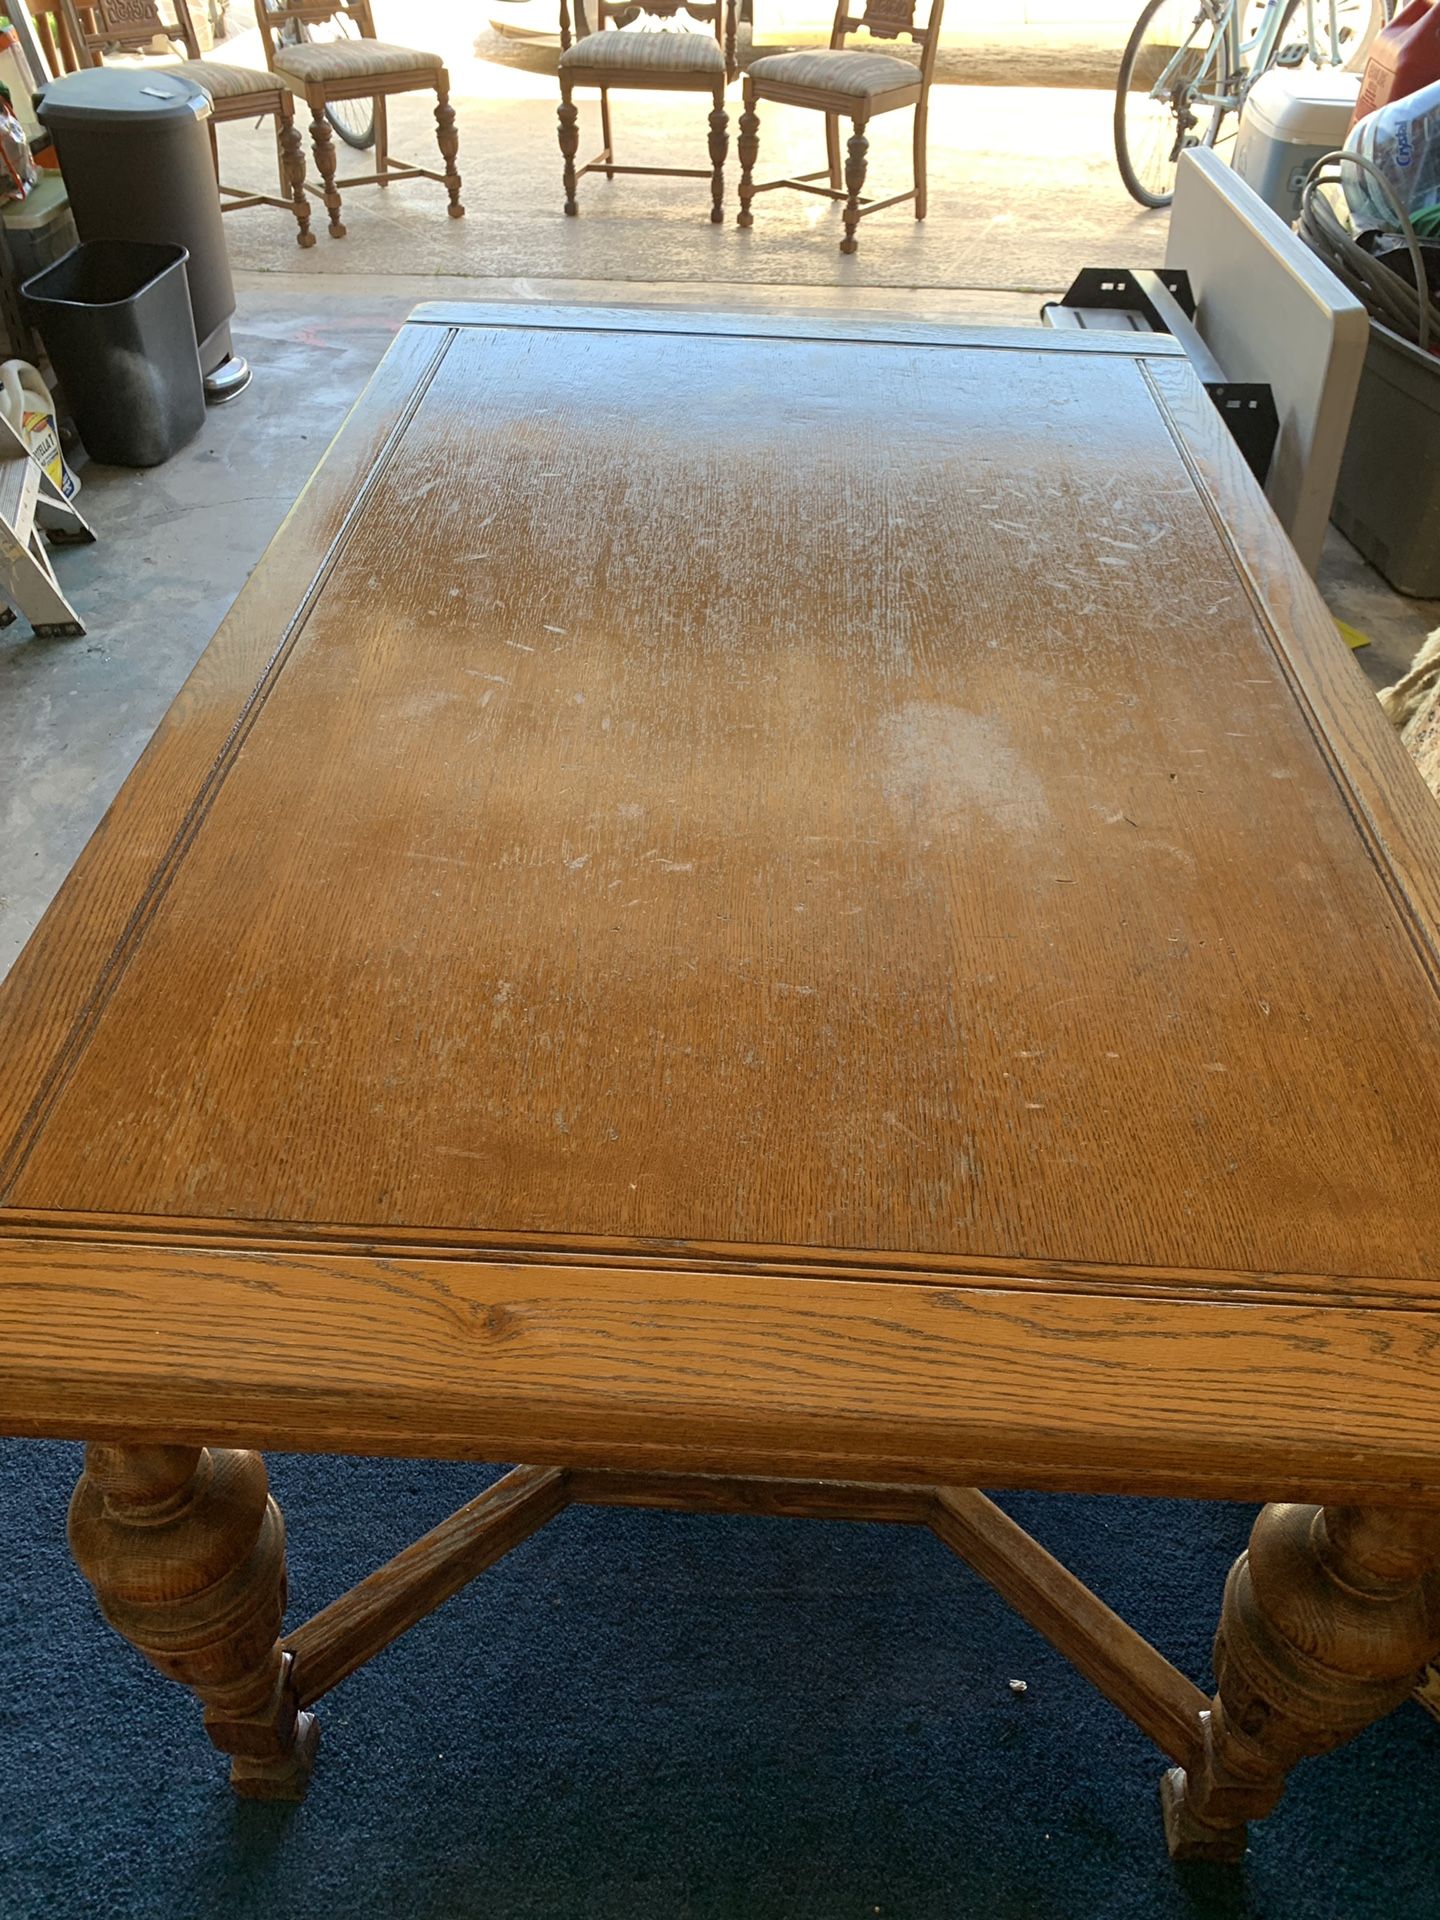 Antique Dining Room Draw Leaf table and chairs